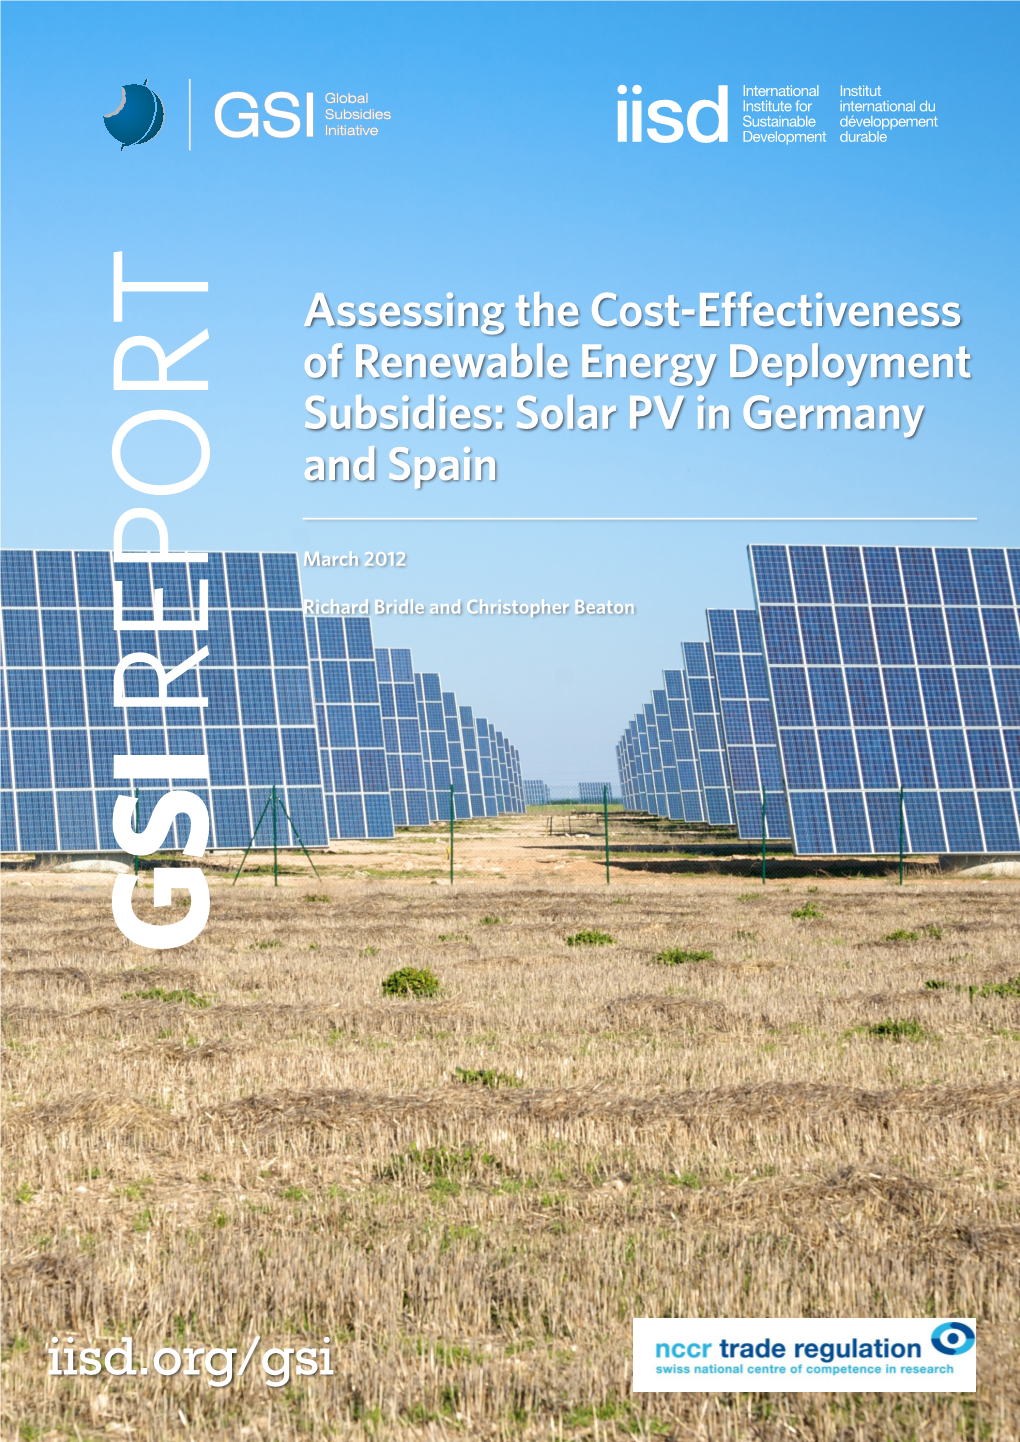 Solar PV in Germany and Spain